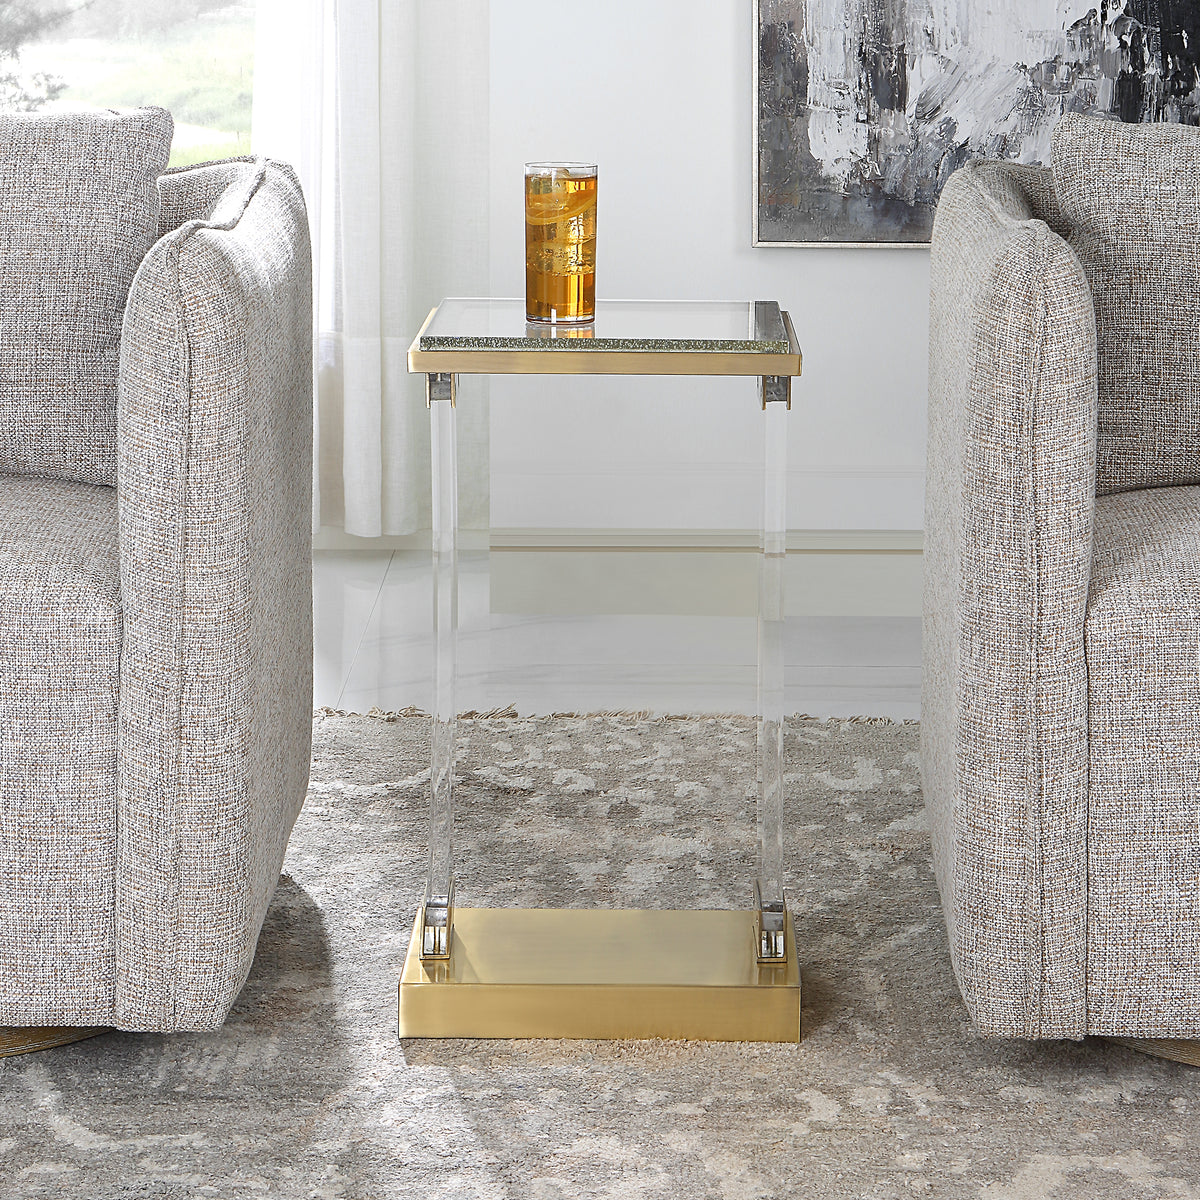 Uttermost Muse Seeded Glass Accent Table